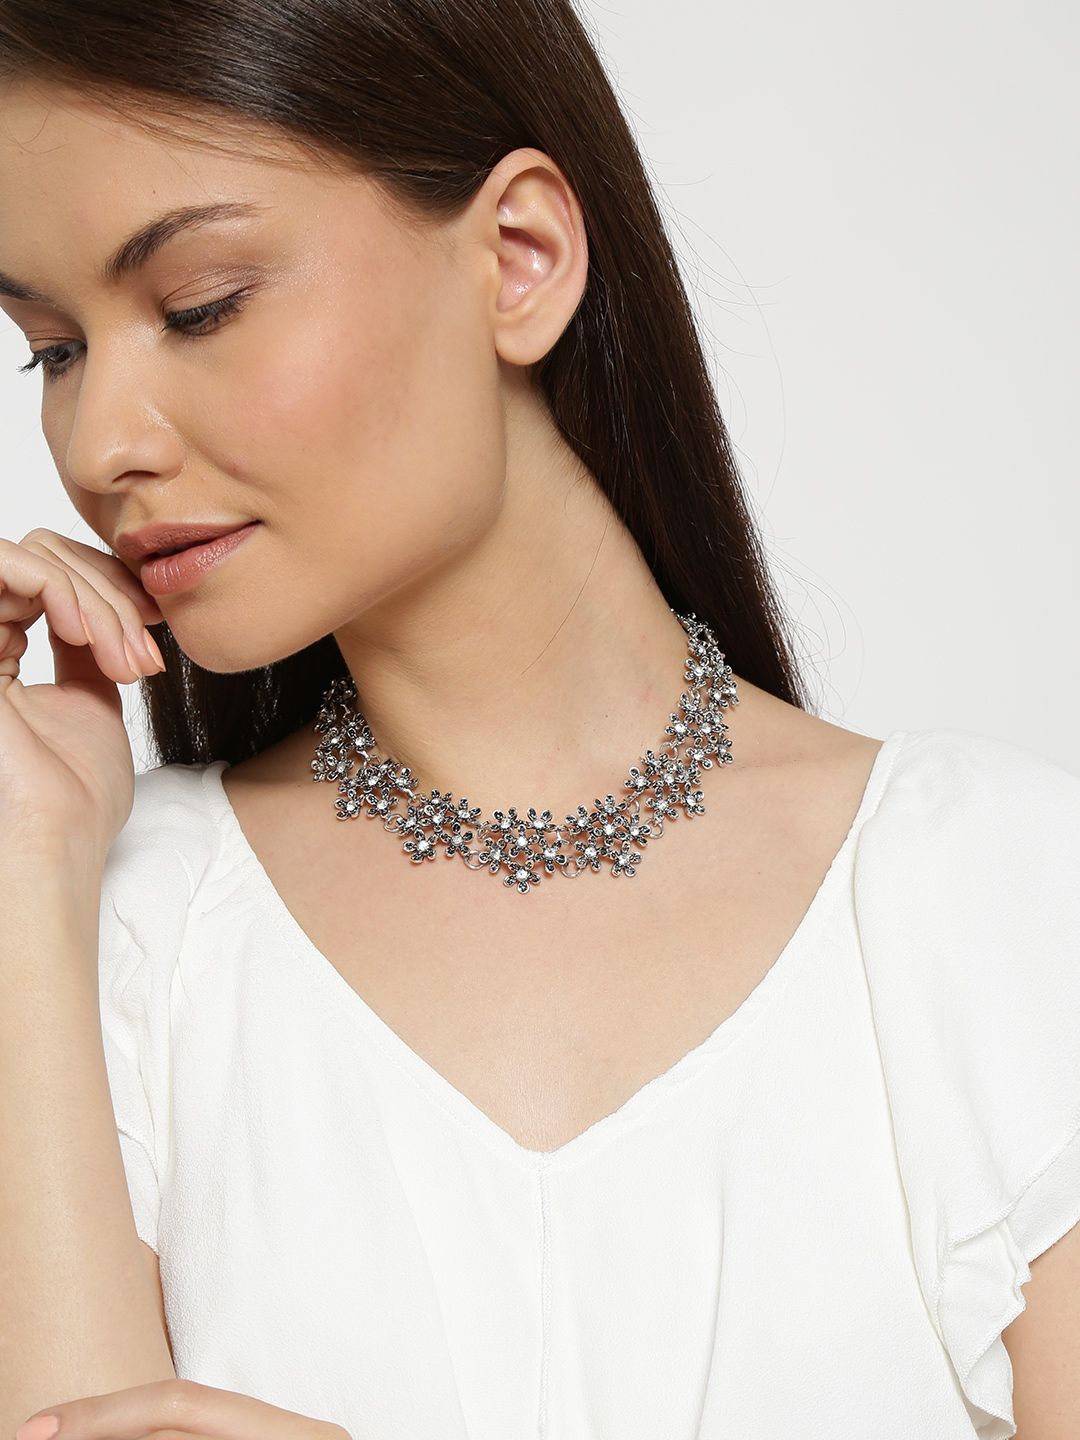 Shining Diva Fashion Oxidised Silver-Toned Stone-Studded Collar Necklace Price in India